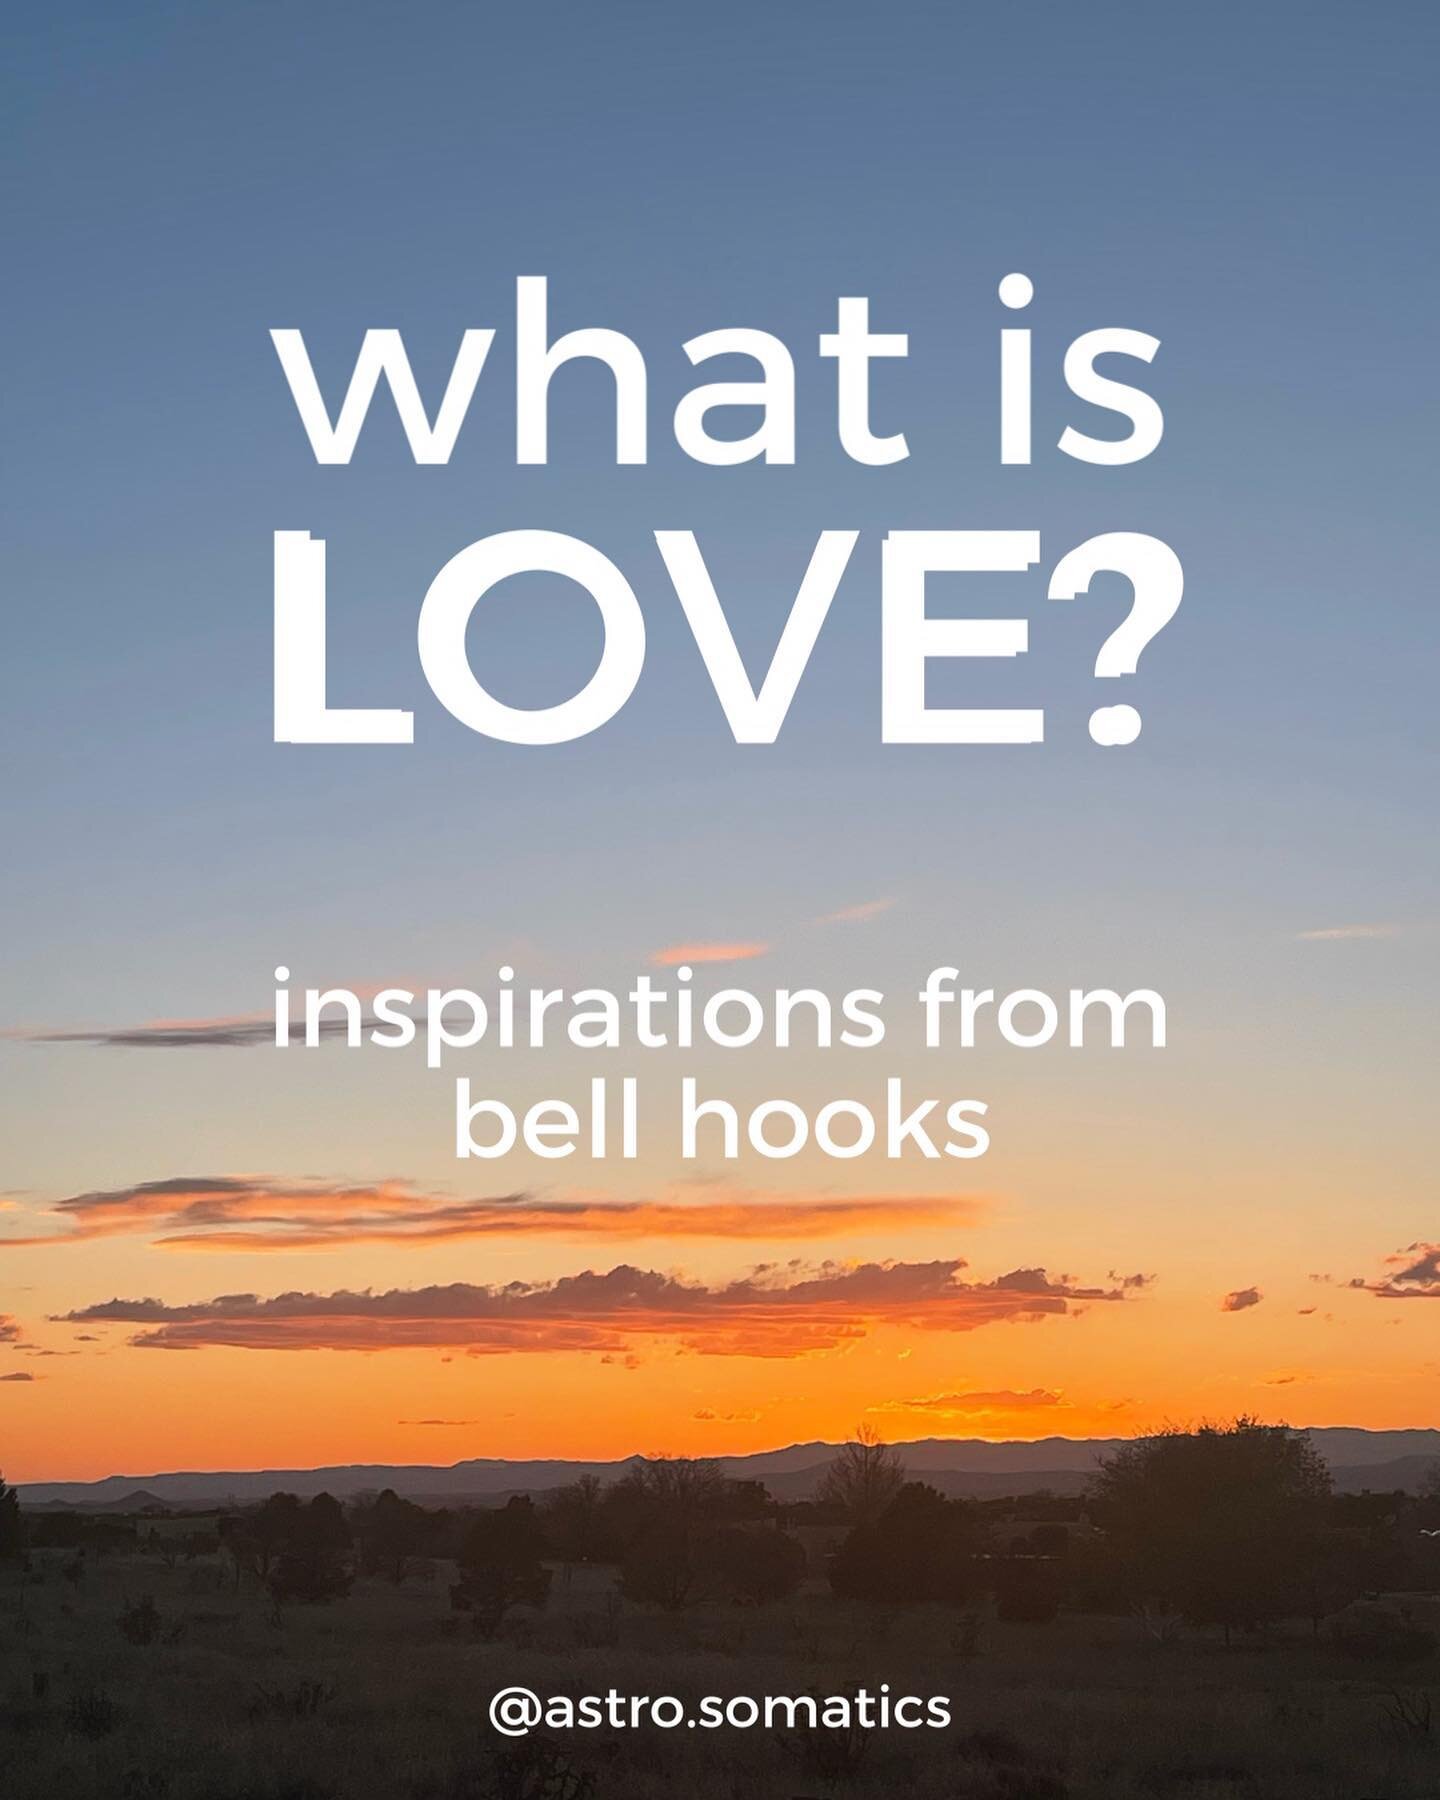 Love is a verb: an intention and an action. 💗

bell hooks, all about love: go read it 😌